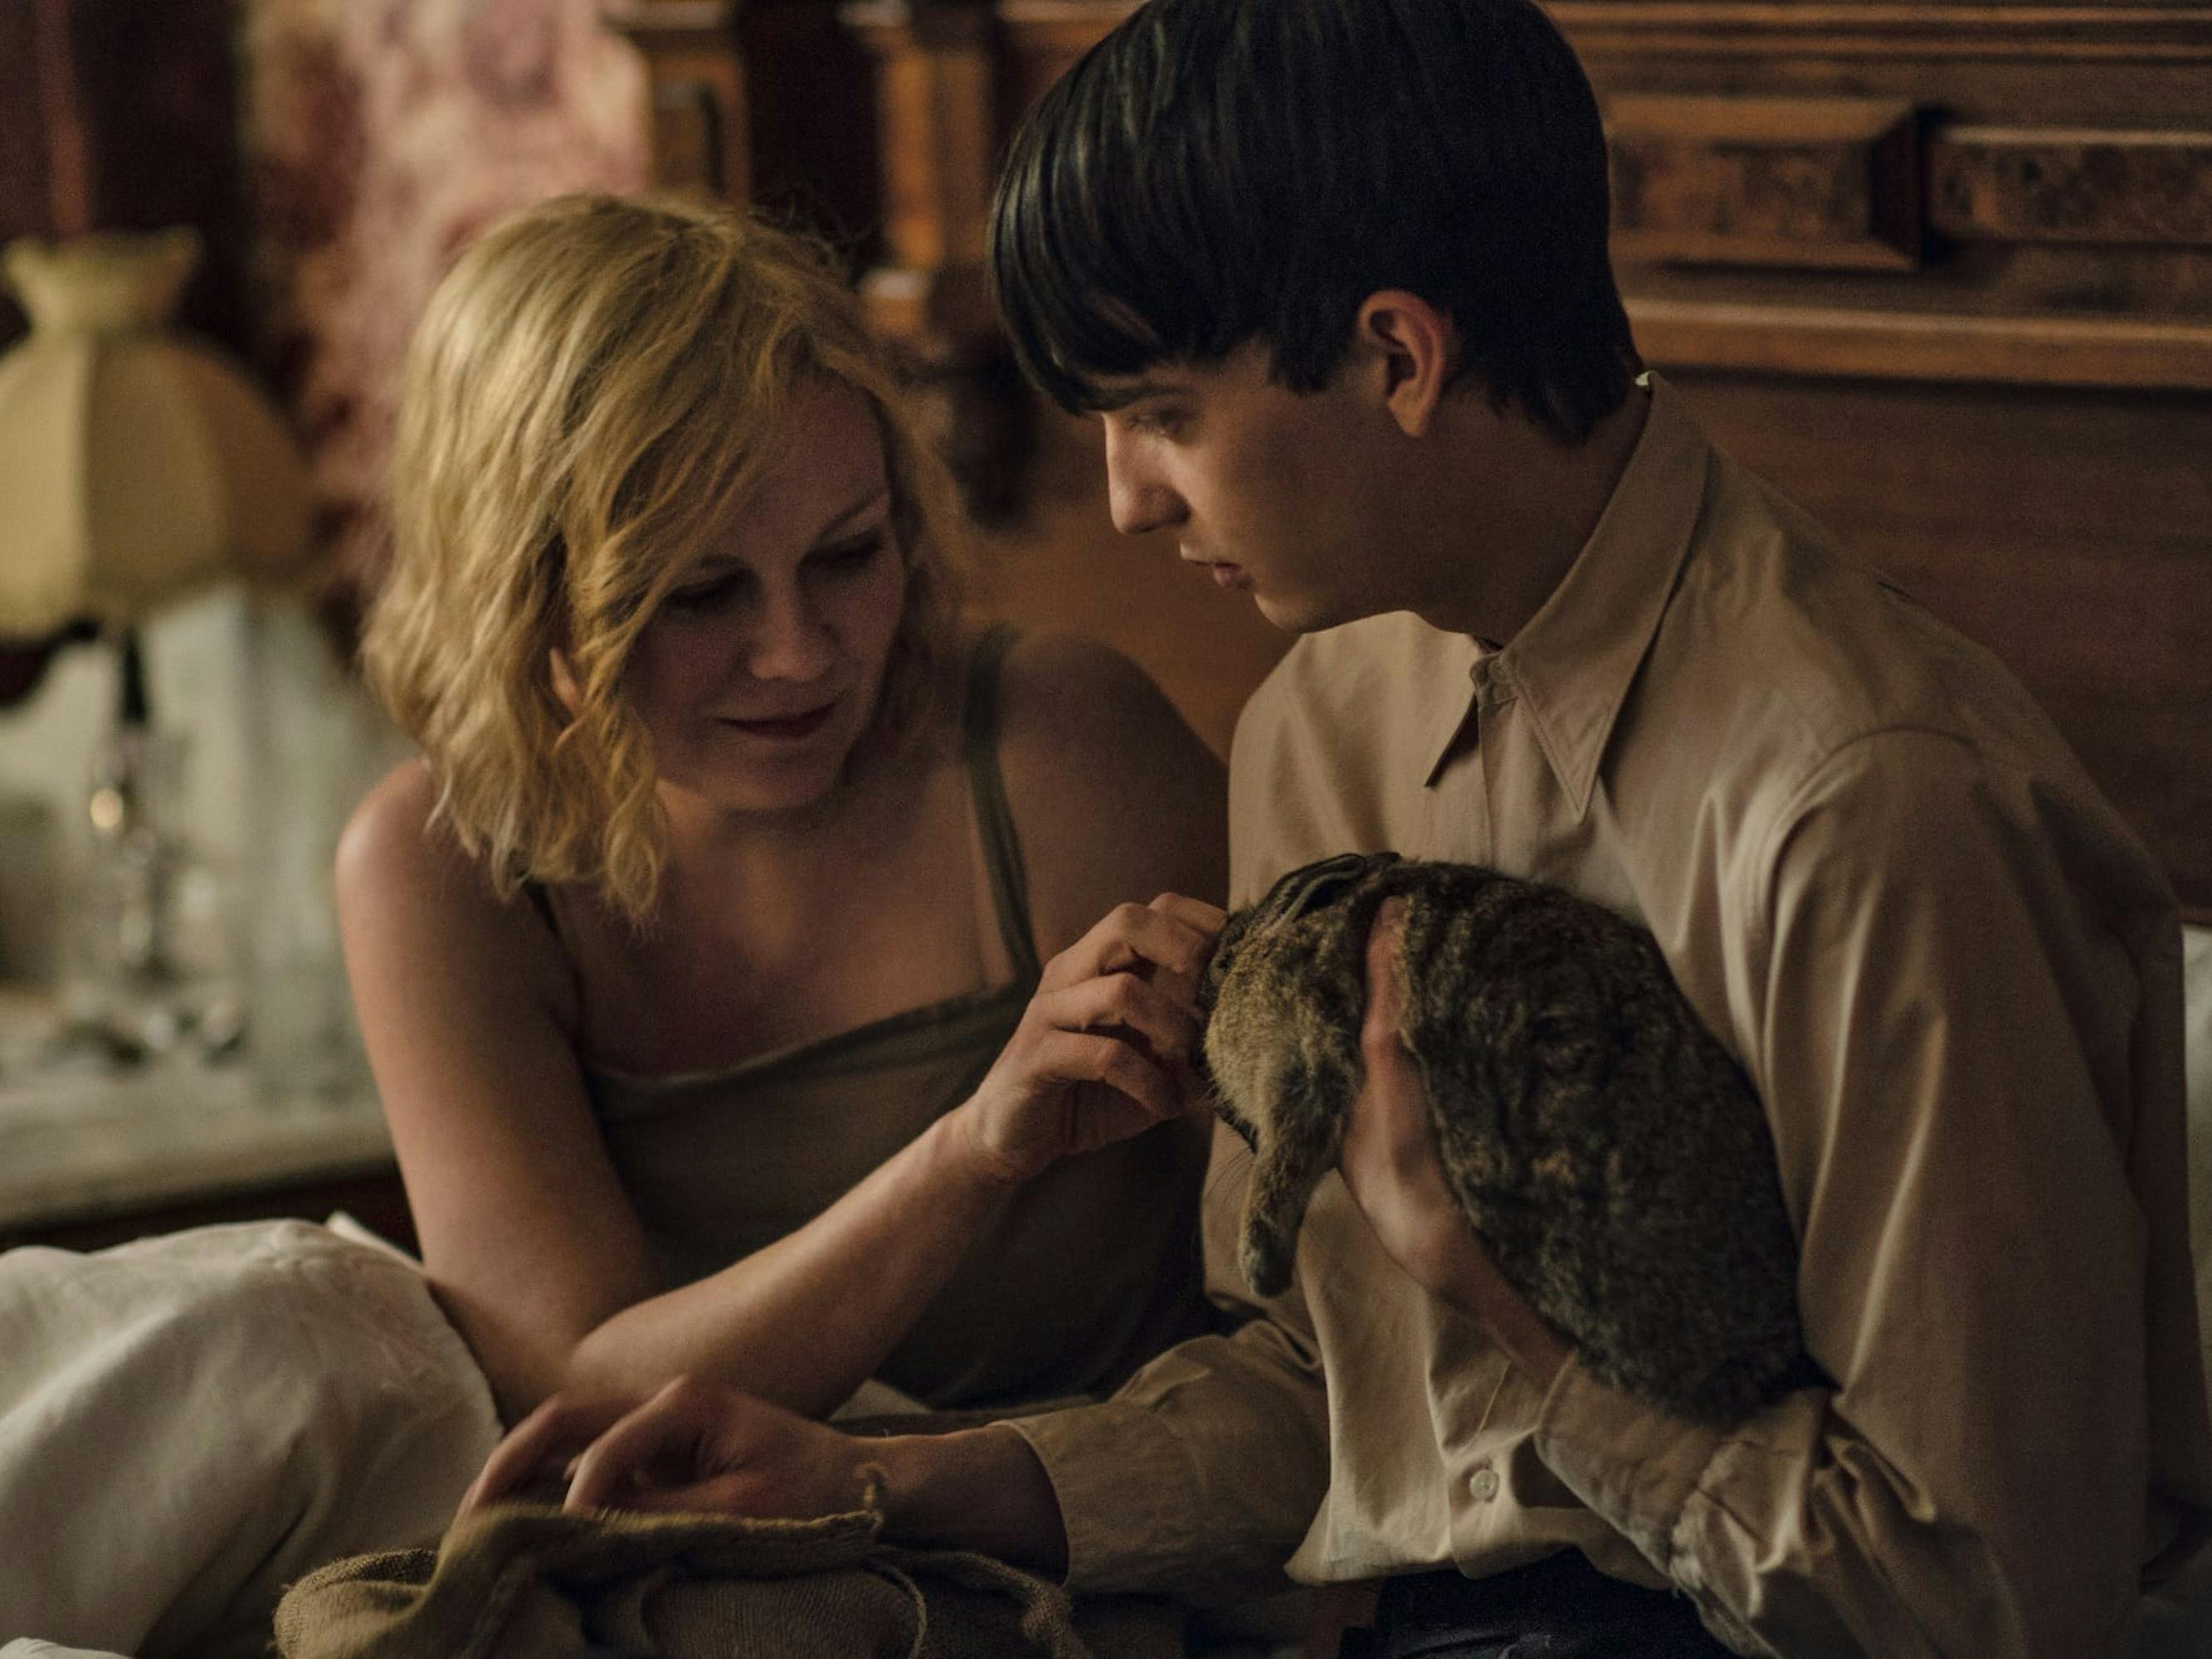 Rose (Kirsten Dunst) and Peter (Kodi Smit-McPhee) sit in bed. Rose wears a green dress and pets a bunny in Peter’s arms.